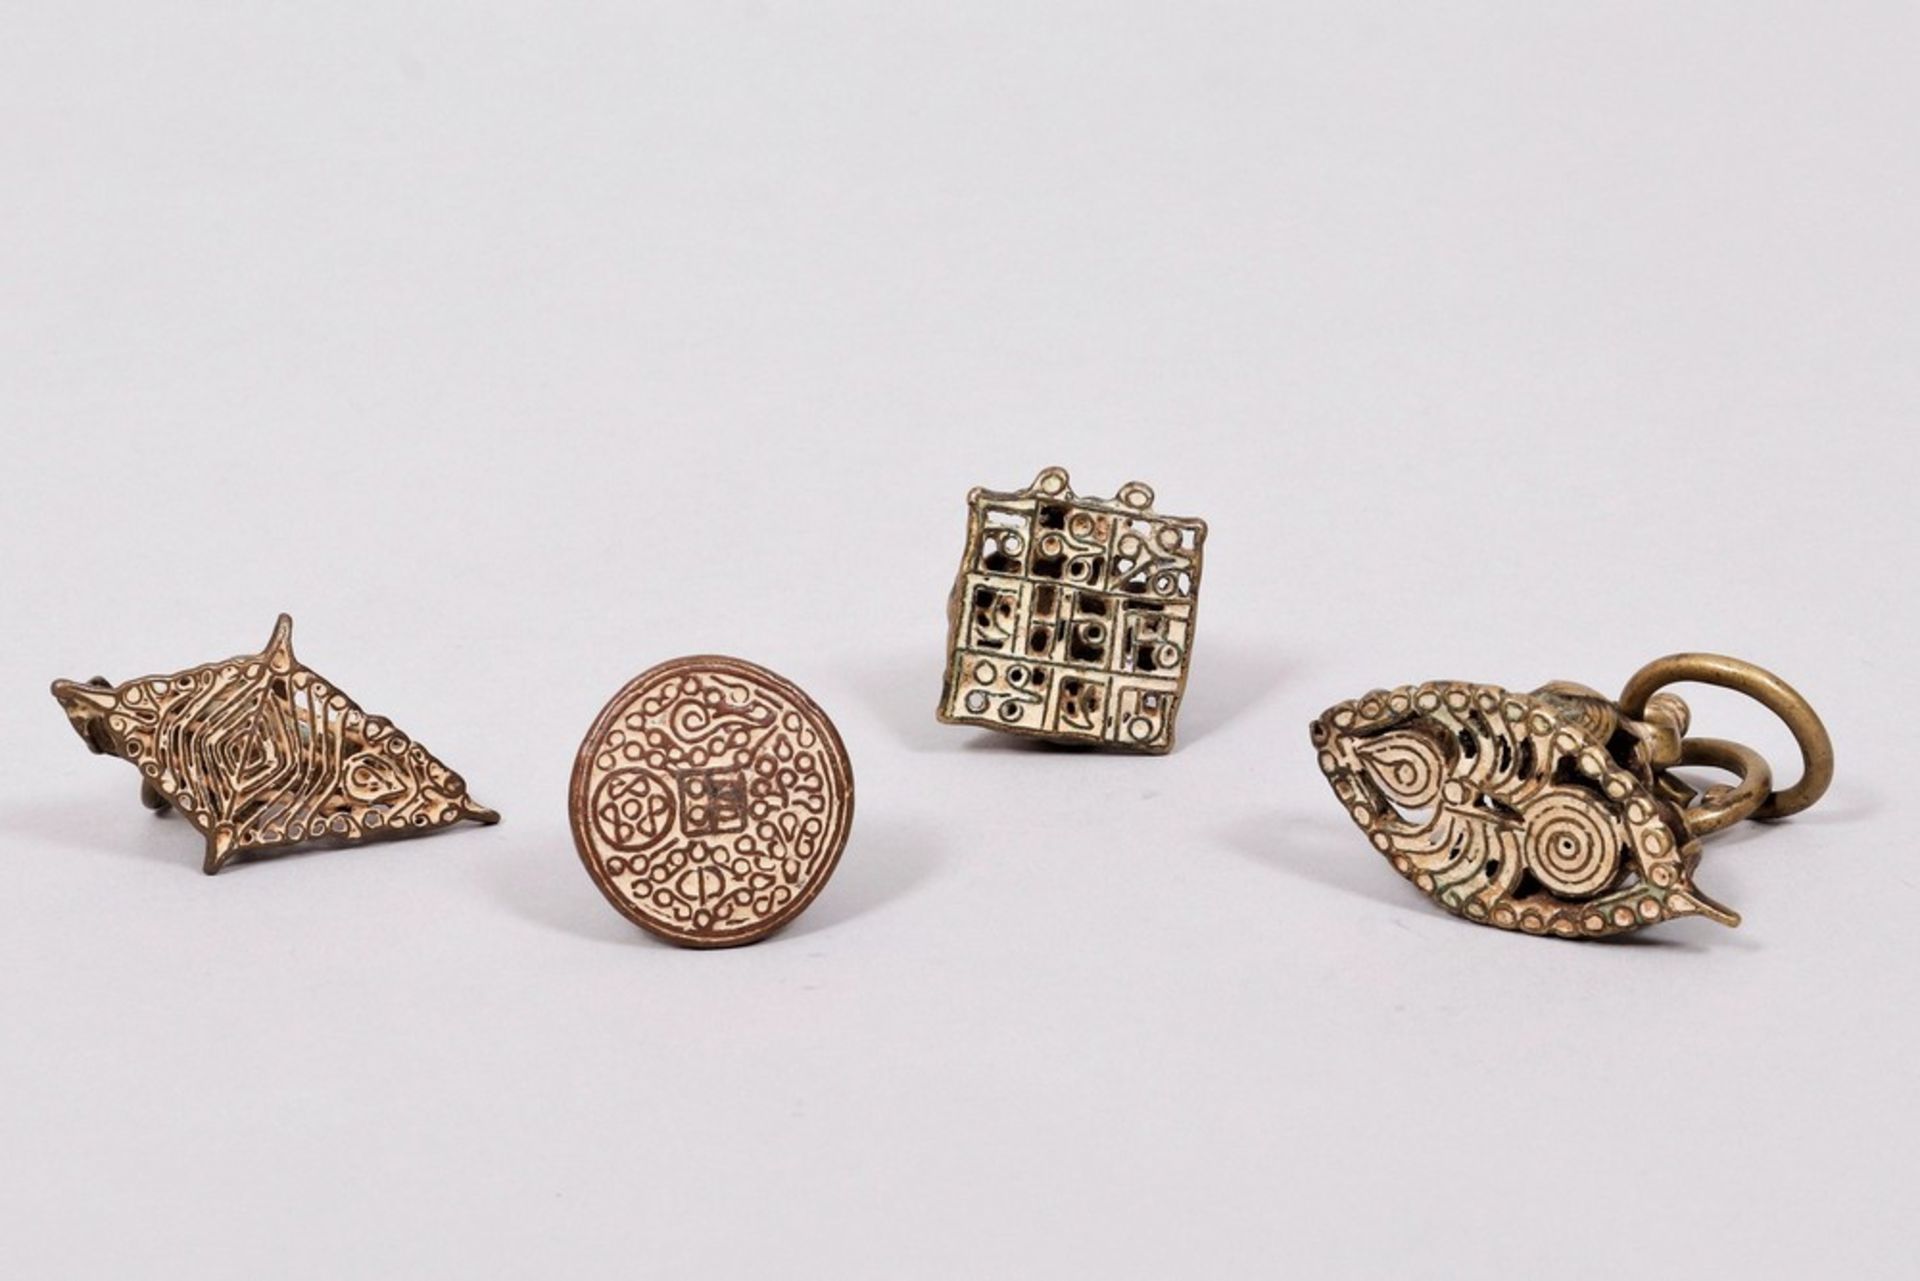 Mixed lot of Tilaka body stamps, brass/bronze, India, around 1900/20, 4 pieces - Image 2 of 2